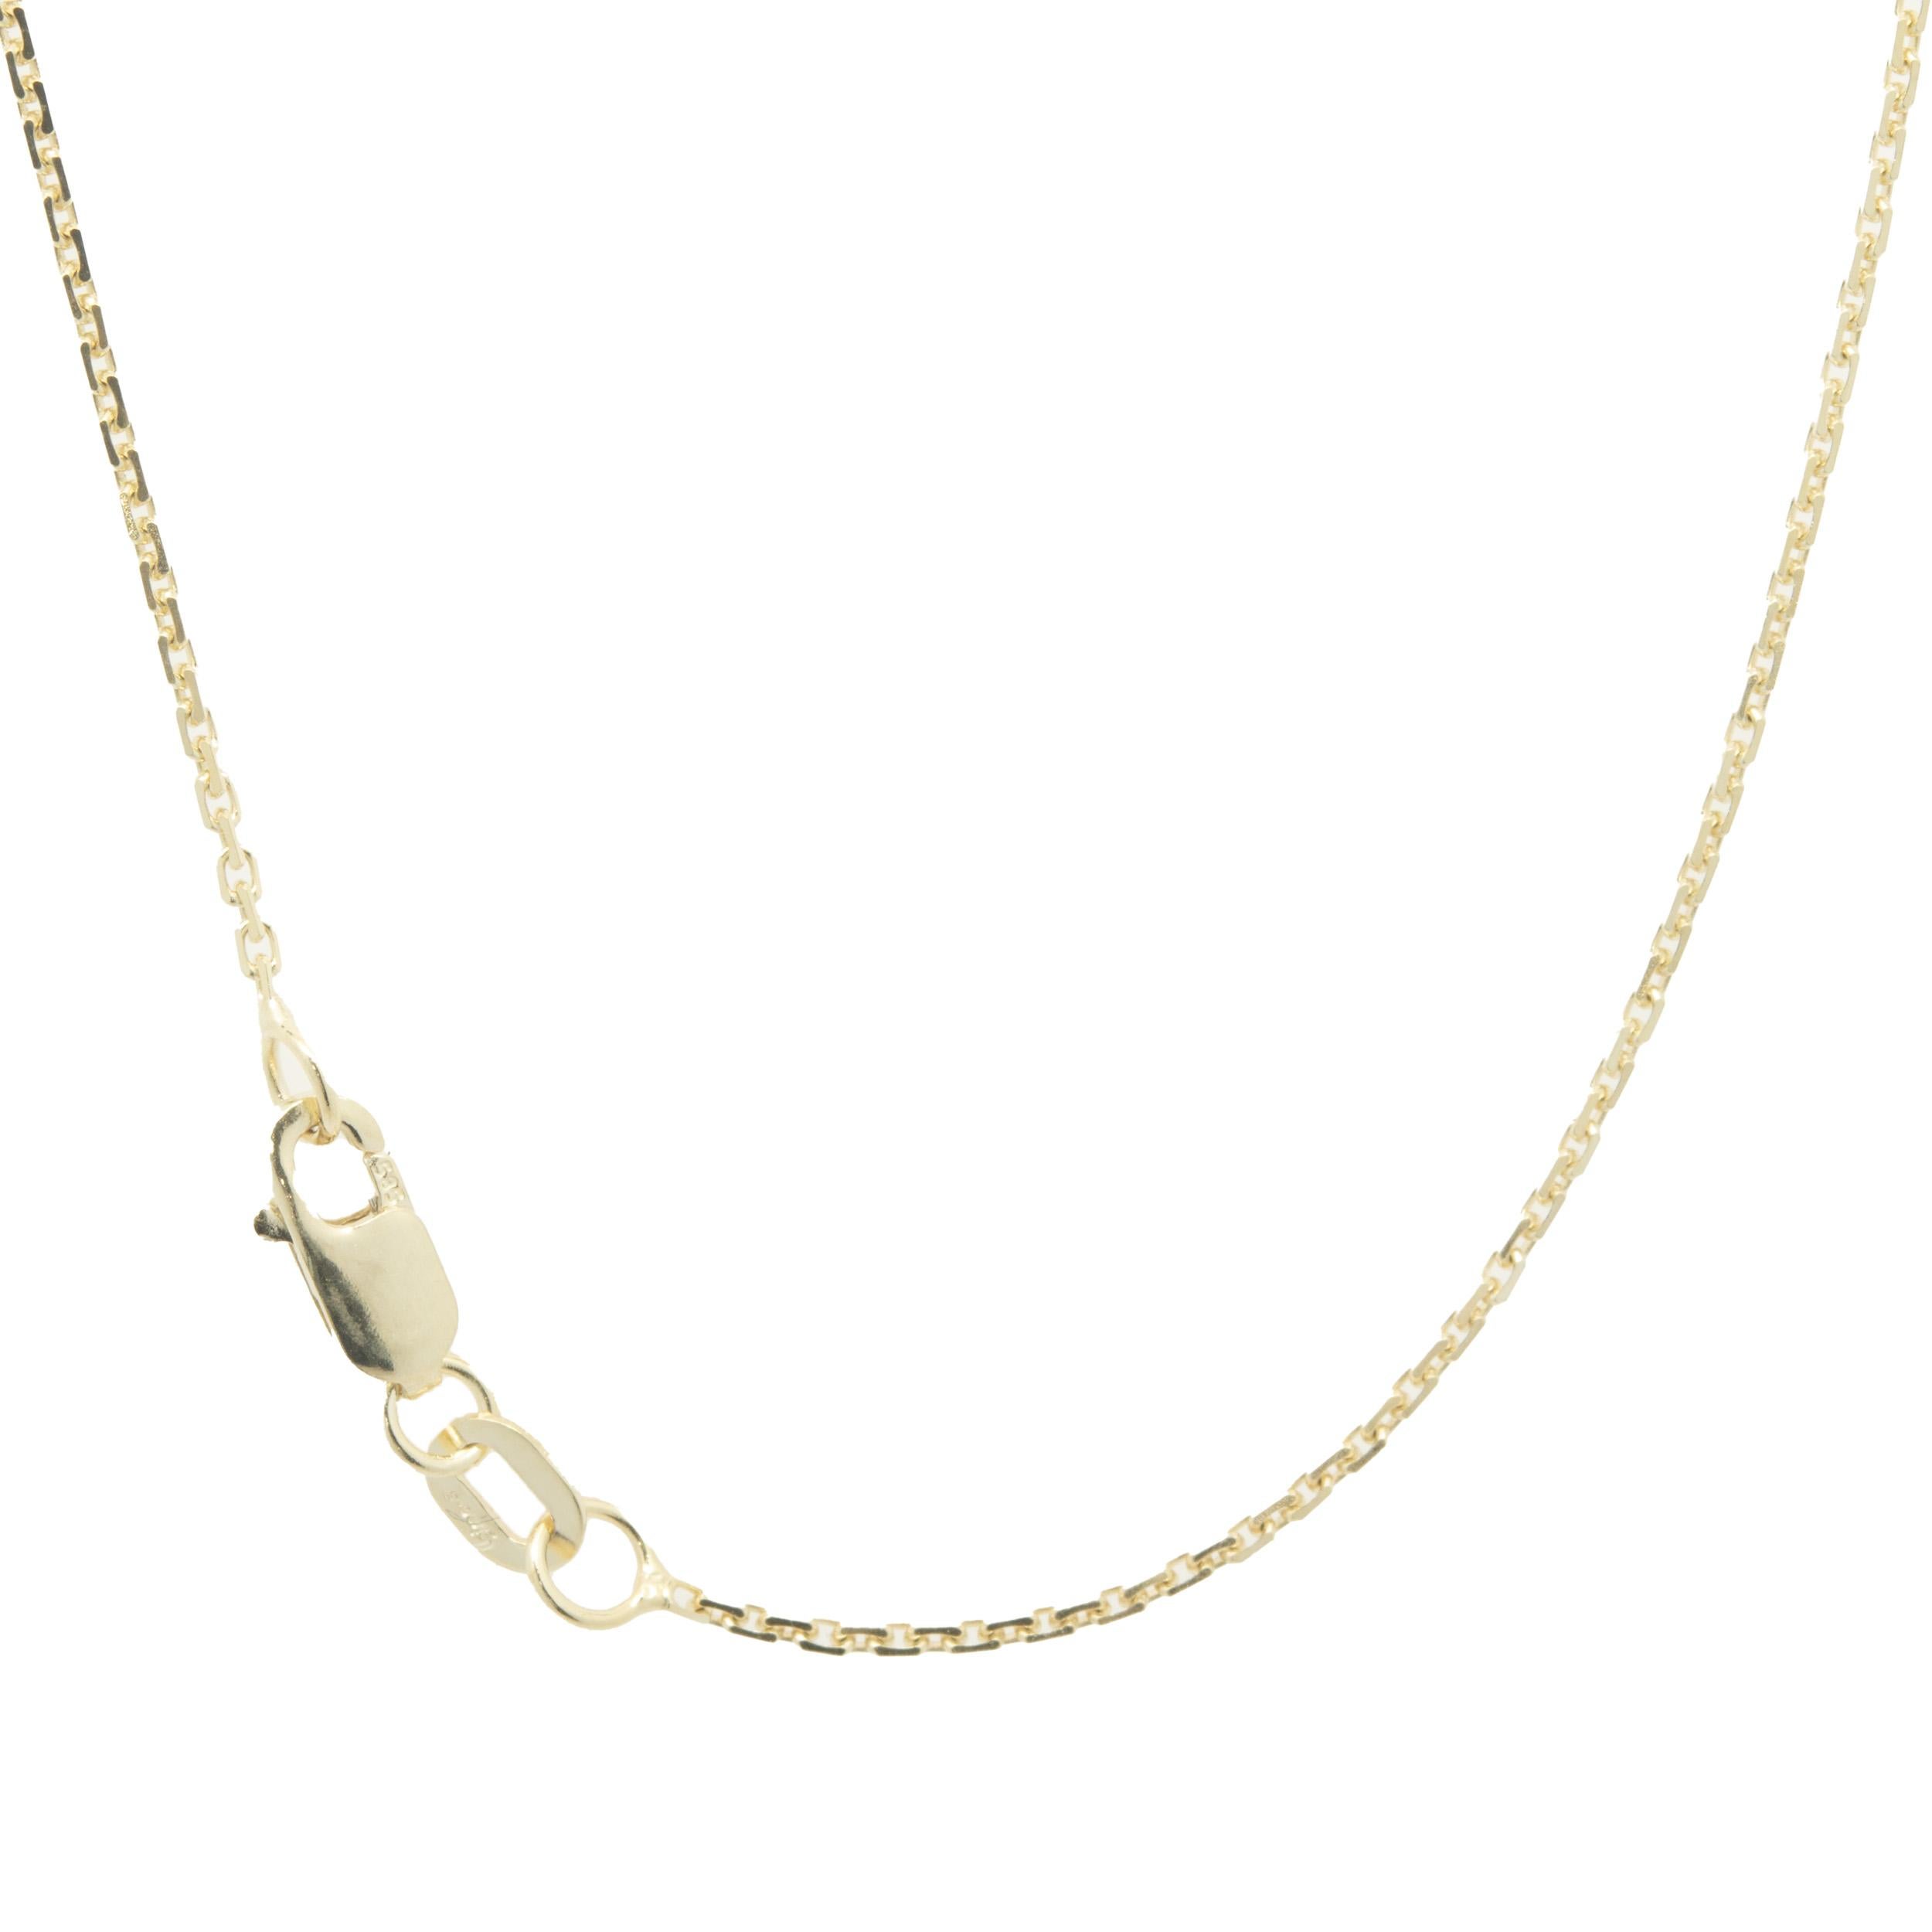 Designer: David Yurman
Material: 18K yellow gold
Diamond: round brilliant cut = 0.20cttw
Color: G
Clarity: VS2
Dimensions: necklace measures 18-inches in length
Weight: 4.23 grams